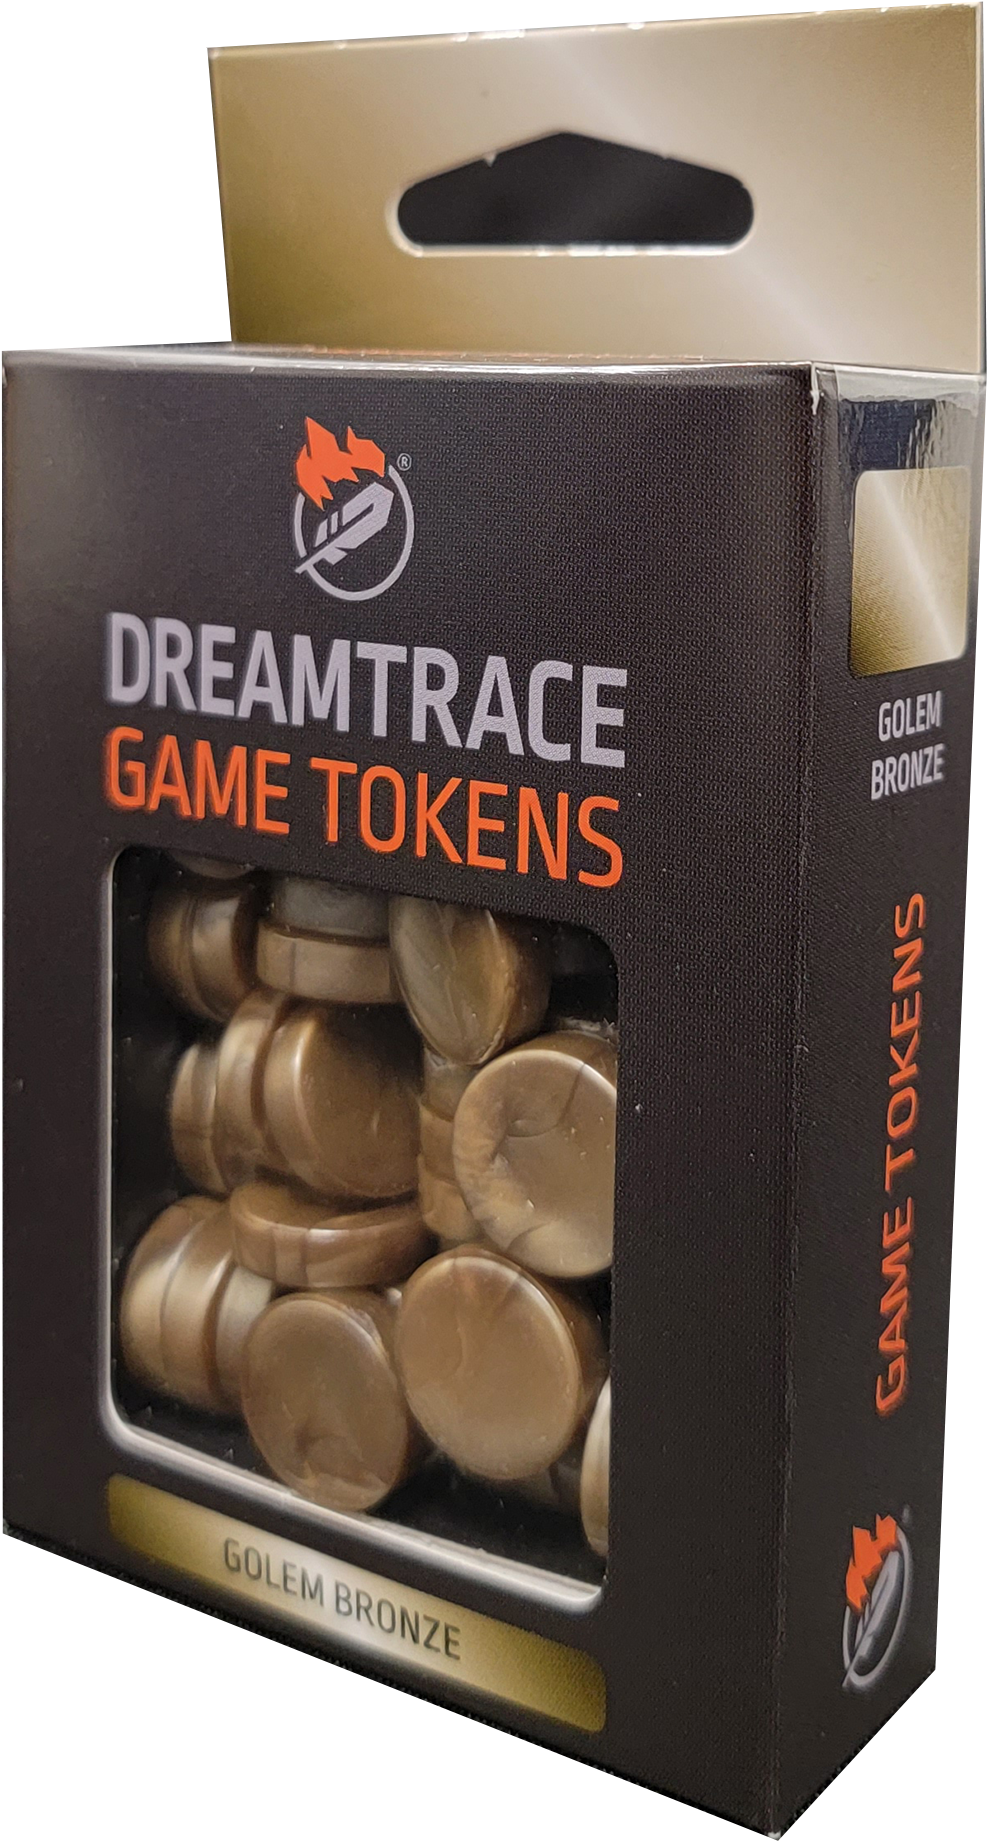 Dreamtrace Gaming Tokens: Golem Bronze 